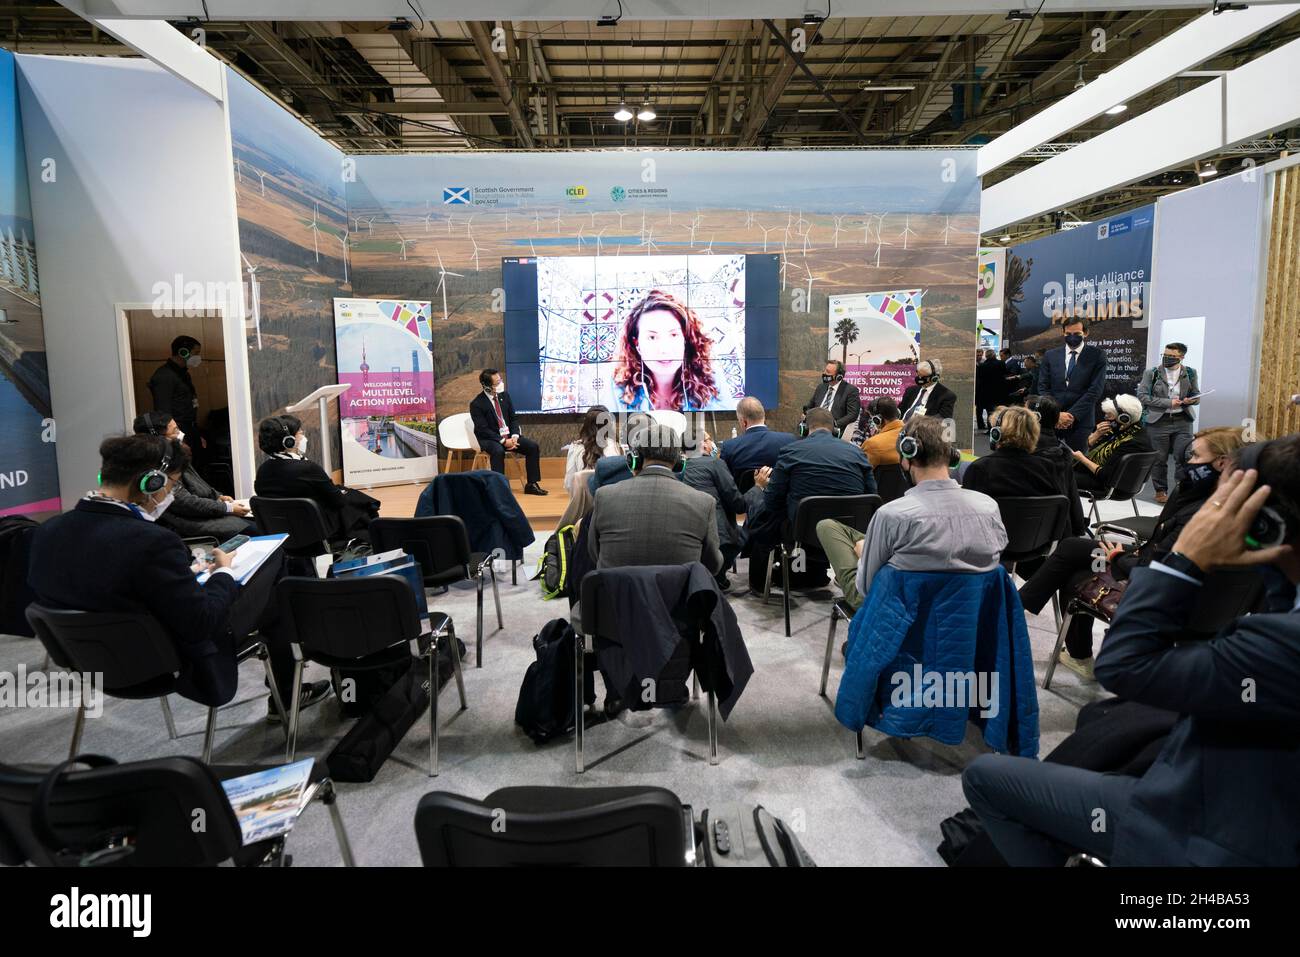 Glasgow, Scotland, UK. 1st November 2021. Images from Monday at the UN climate change conference in Glasgow. Pic; Scottish Government pavilion . Iain Masterton/Alamy Live News. Stock Photo